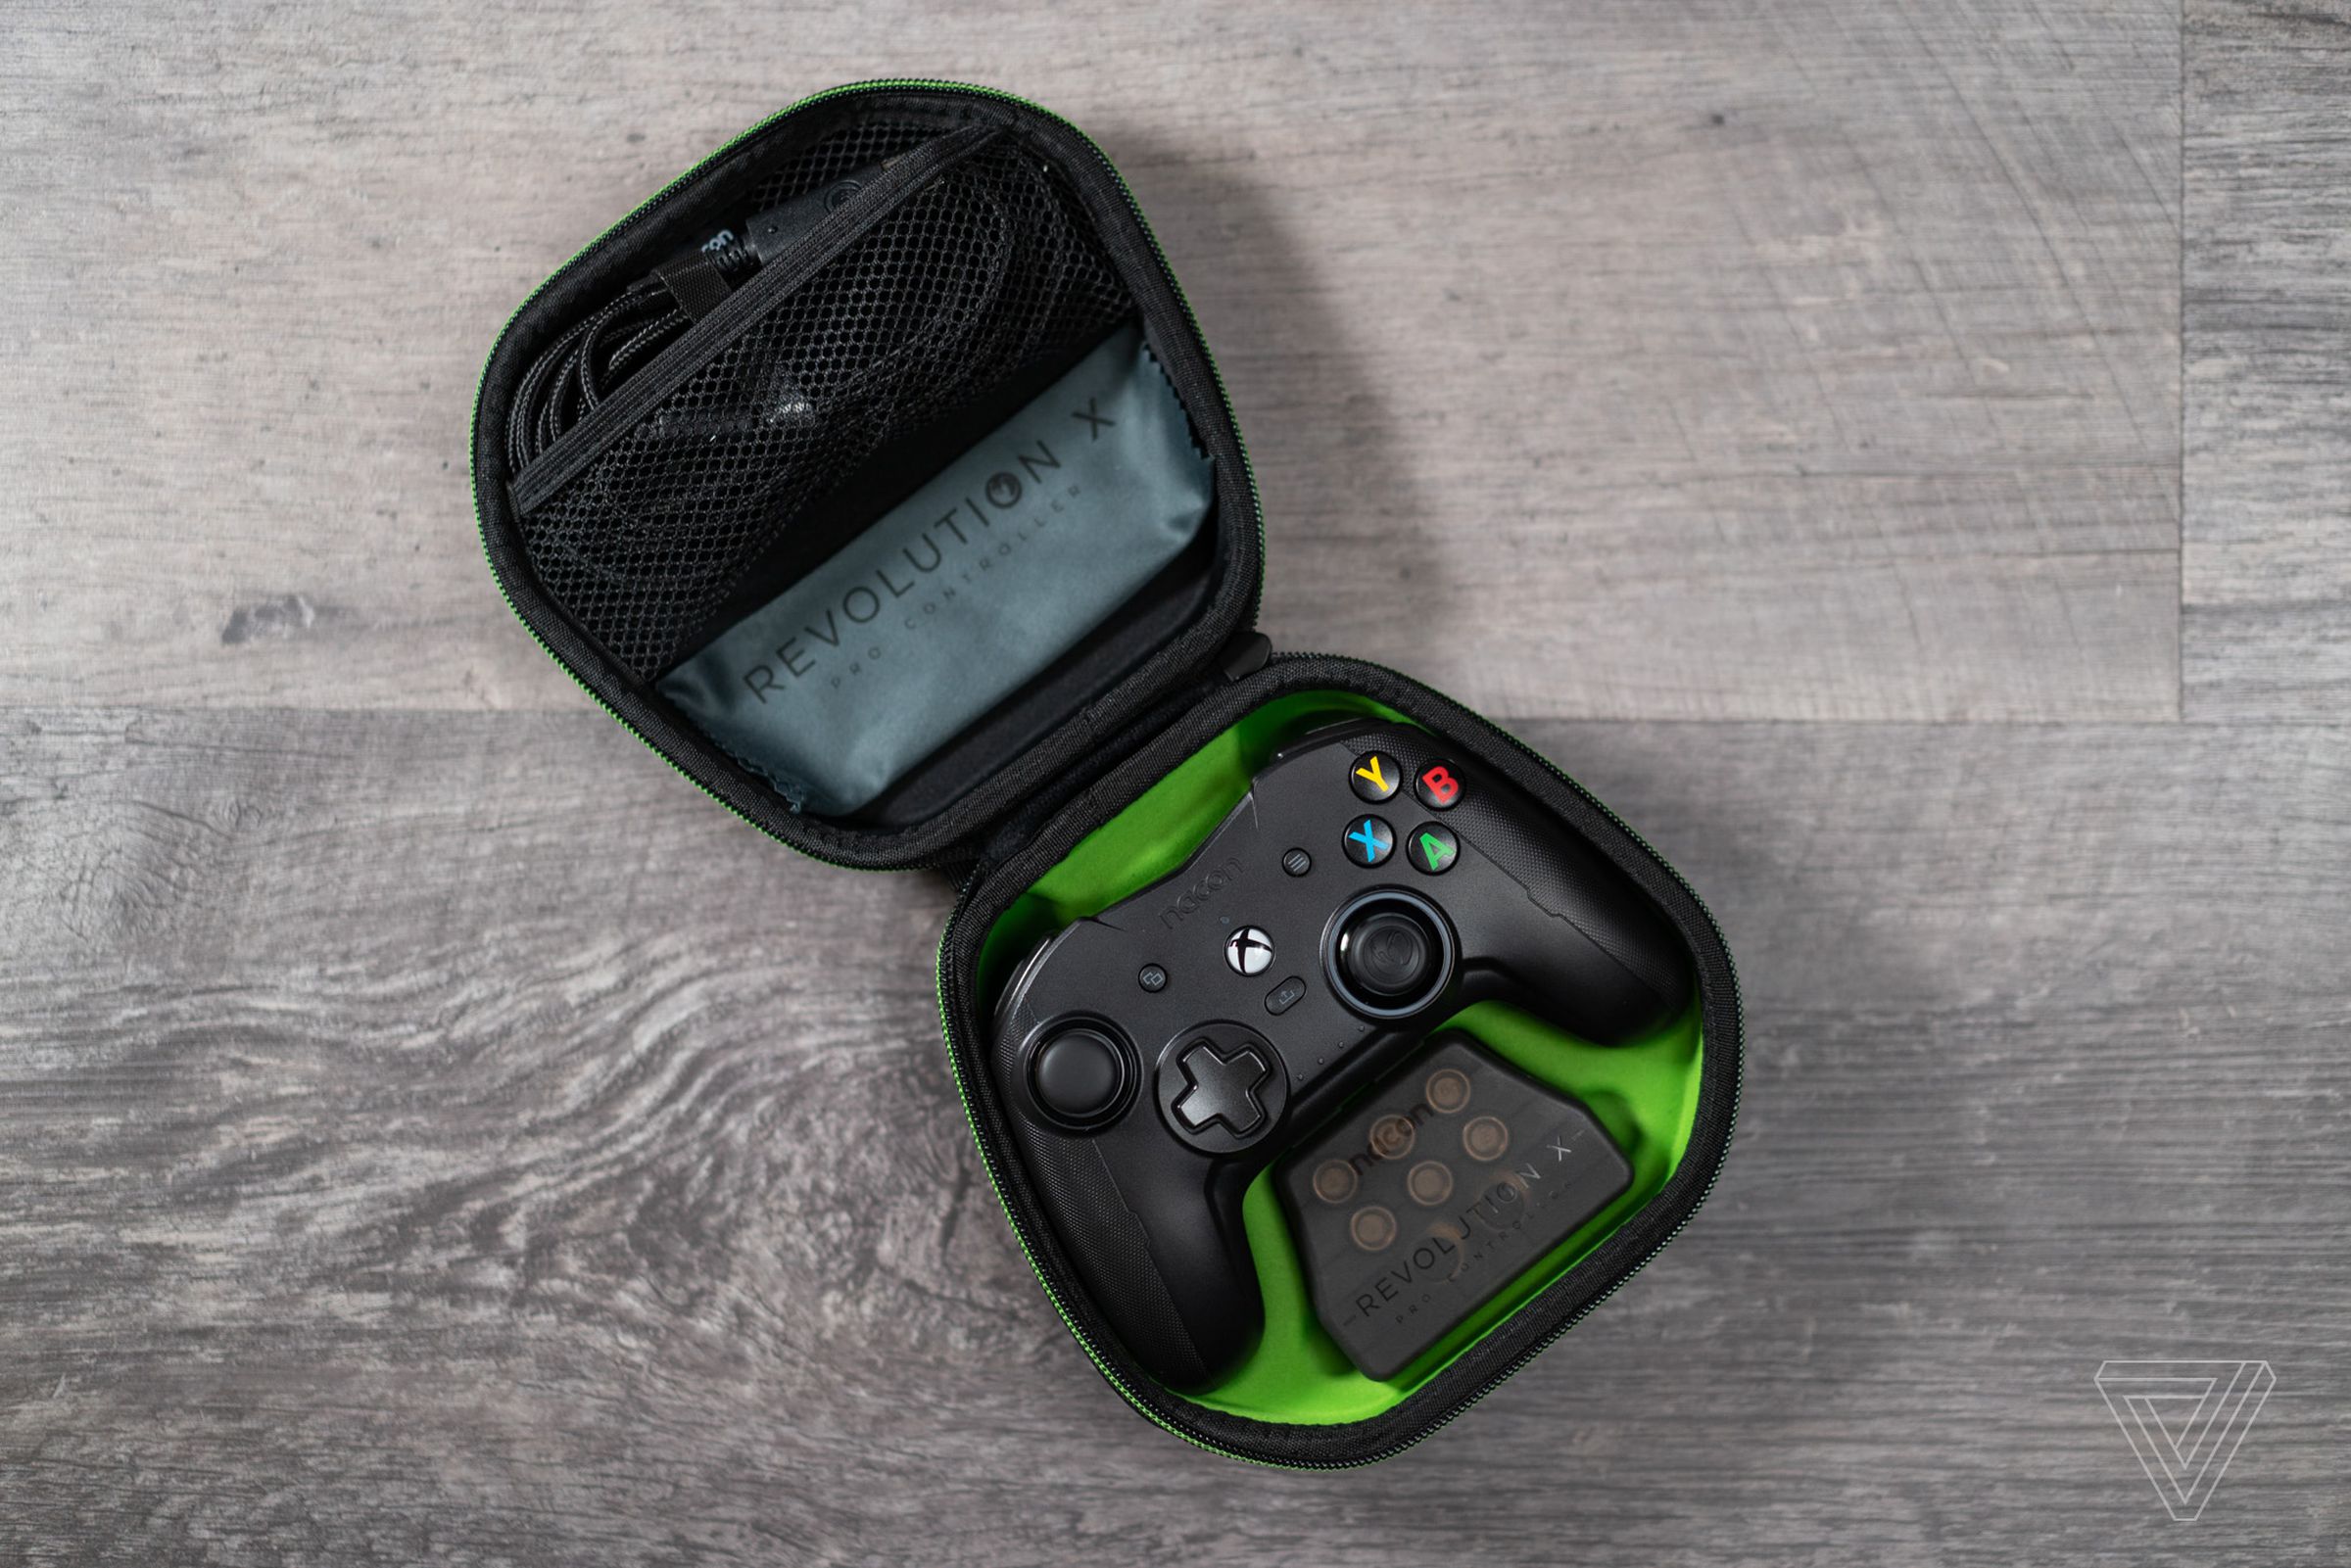 The Nacon Revolution X controller resting in its included carrying case, with all its accessories.